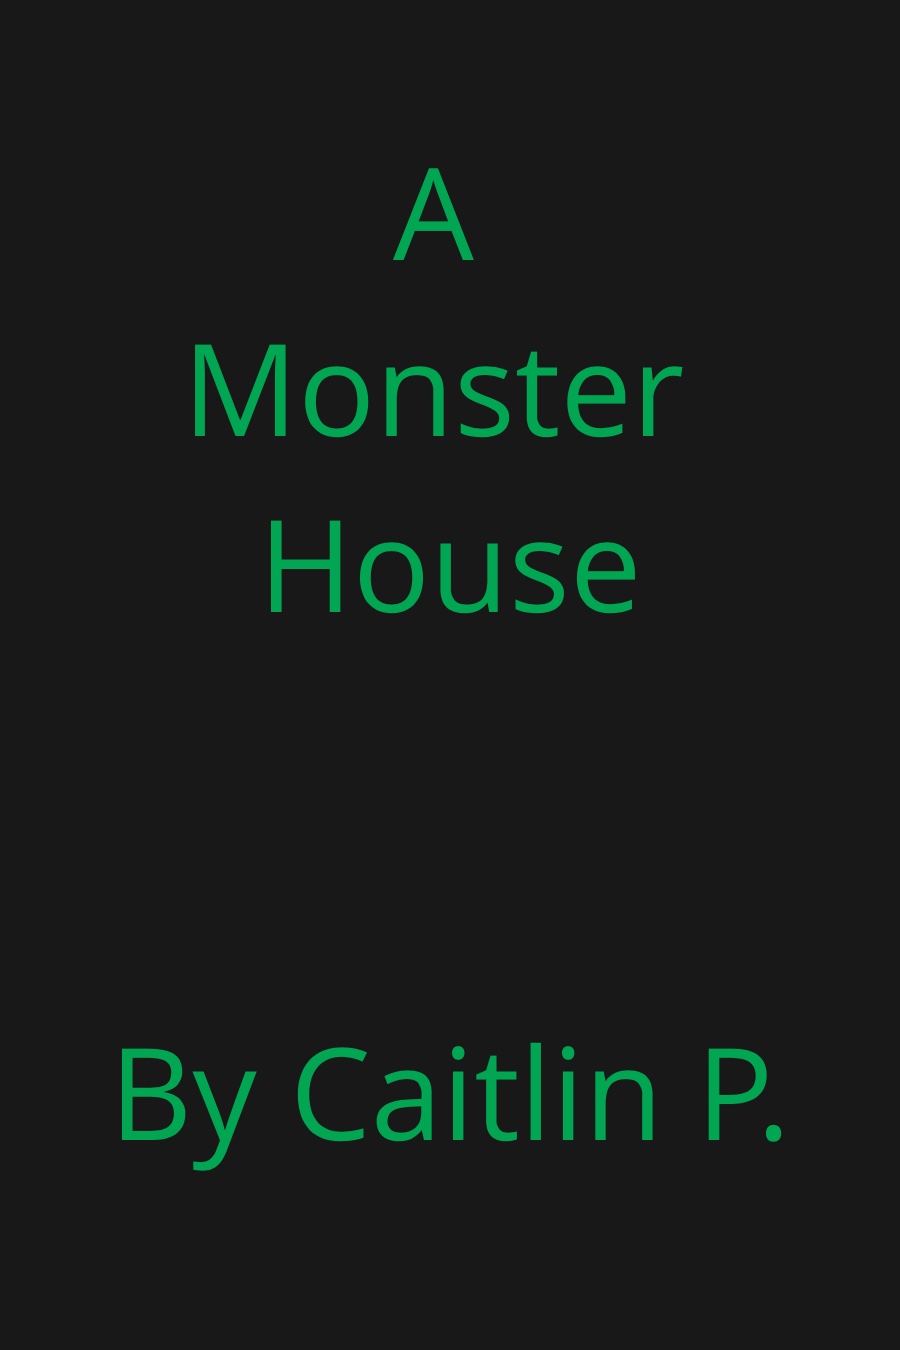 A Monster House by Caitlin P